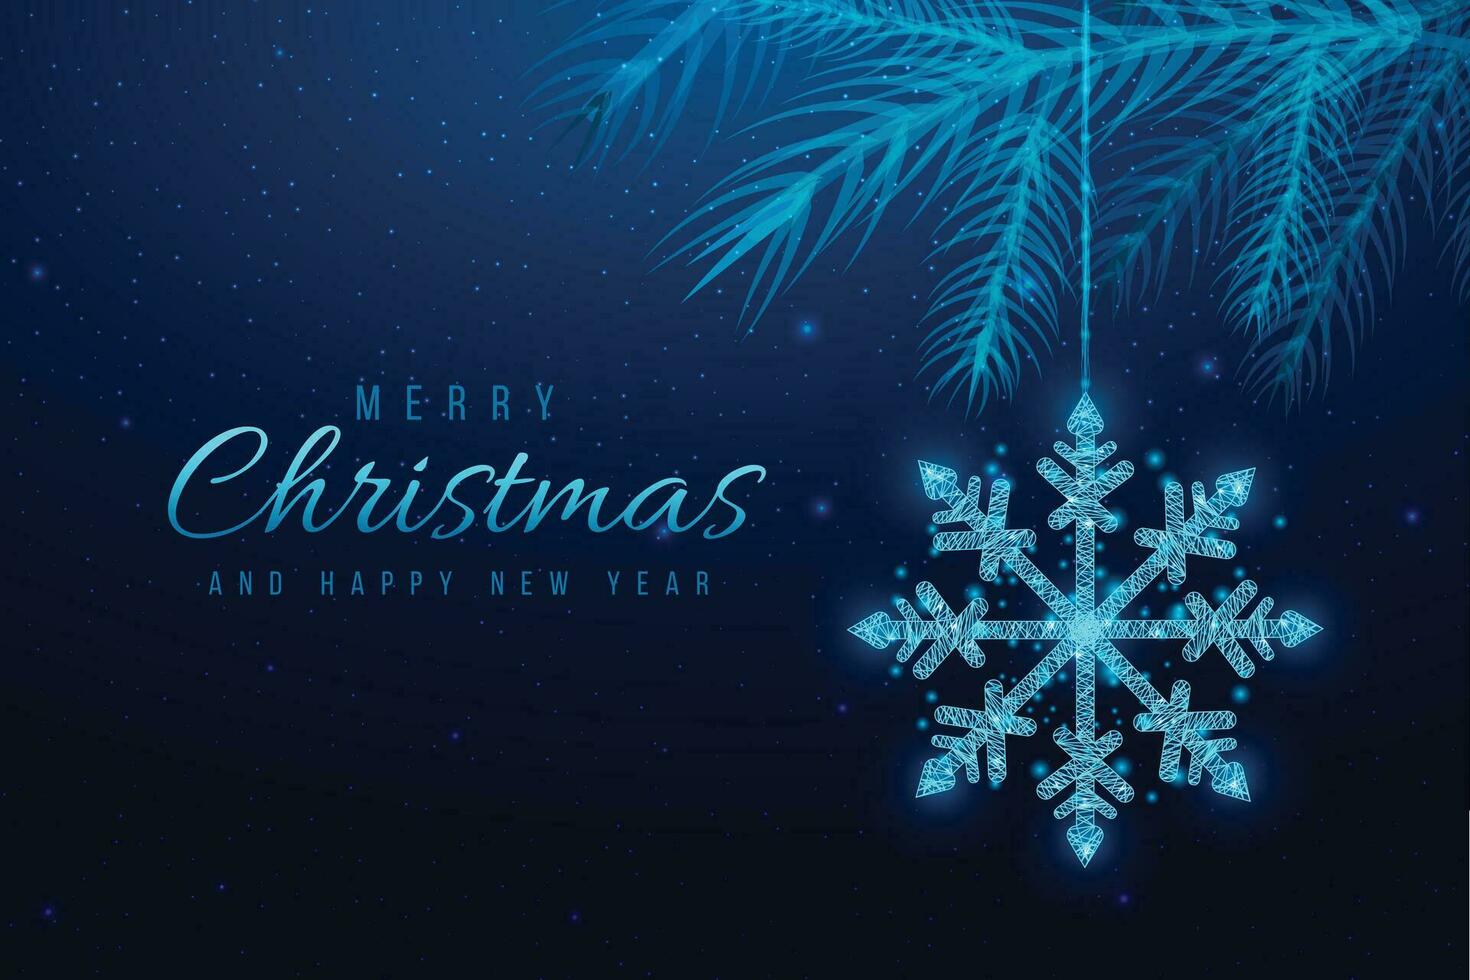 Wireframe snowflake and Christmas tree branches, low poly style. New Year banner. Abstract modern vector illustration on blue background.